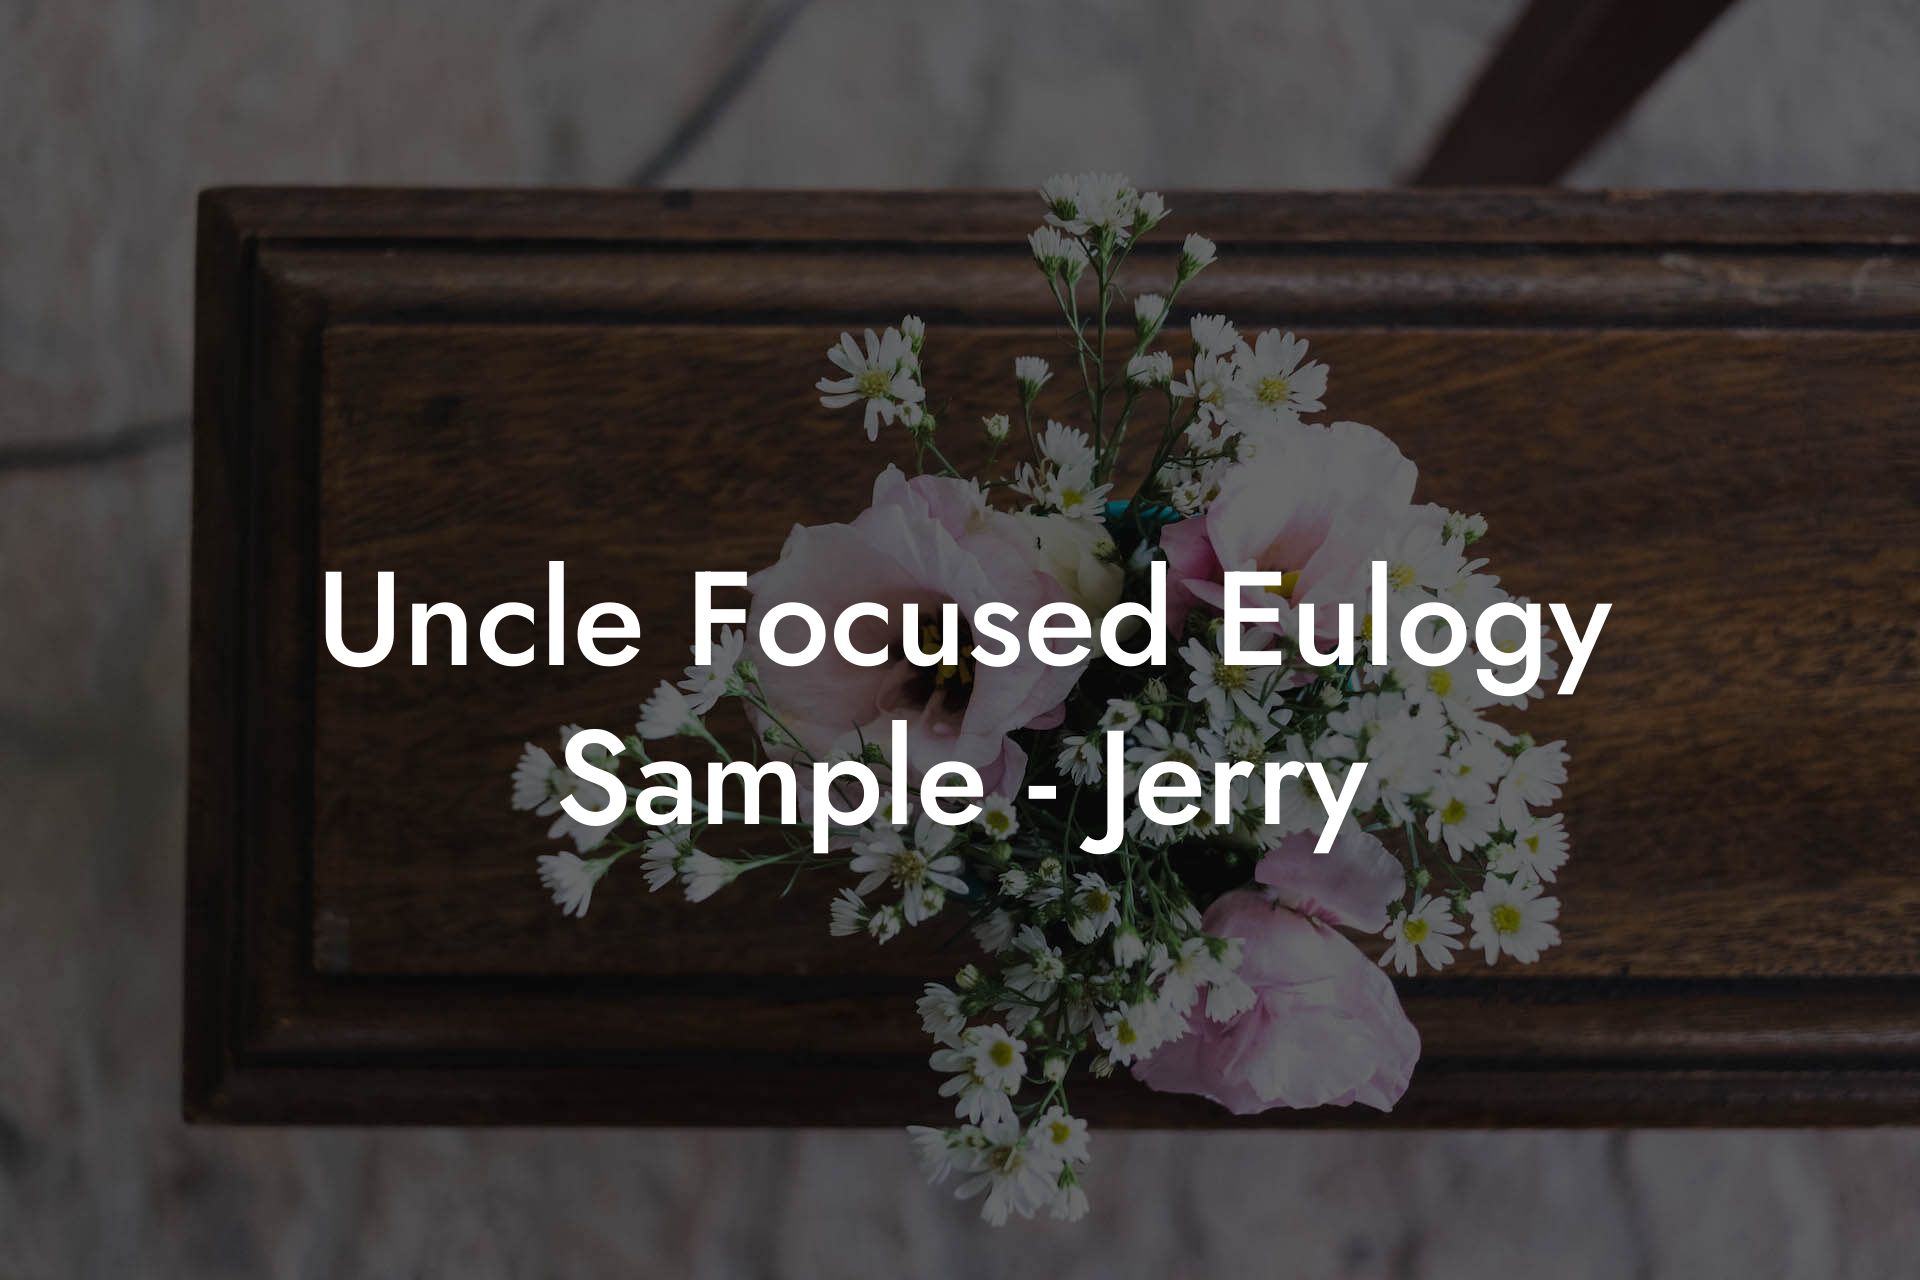 Uncle Focused Eulogy Sample - Jerry